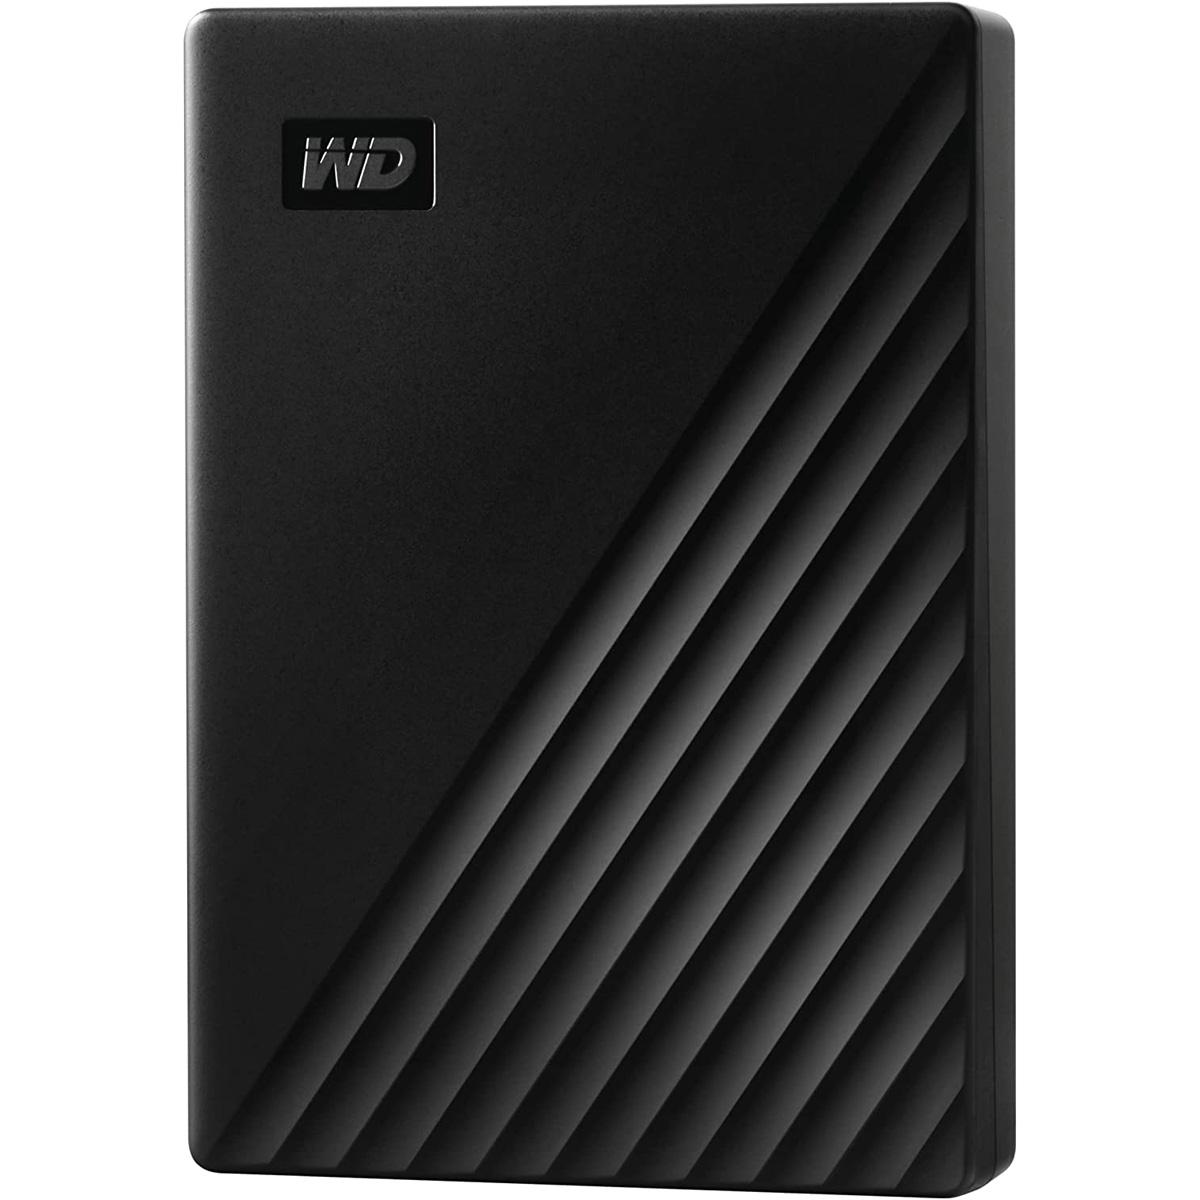 4TB WD My Passport Portable External Hard Drive for $70 Shipped